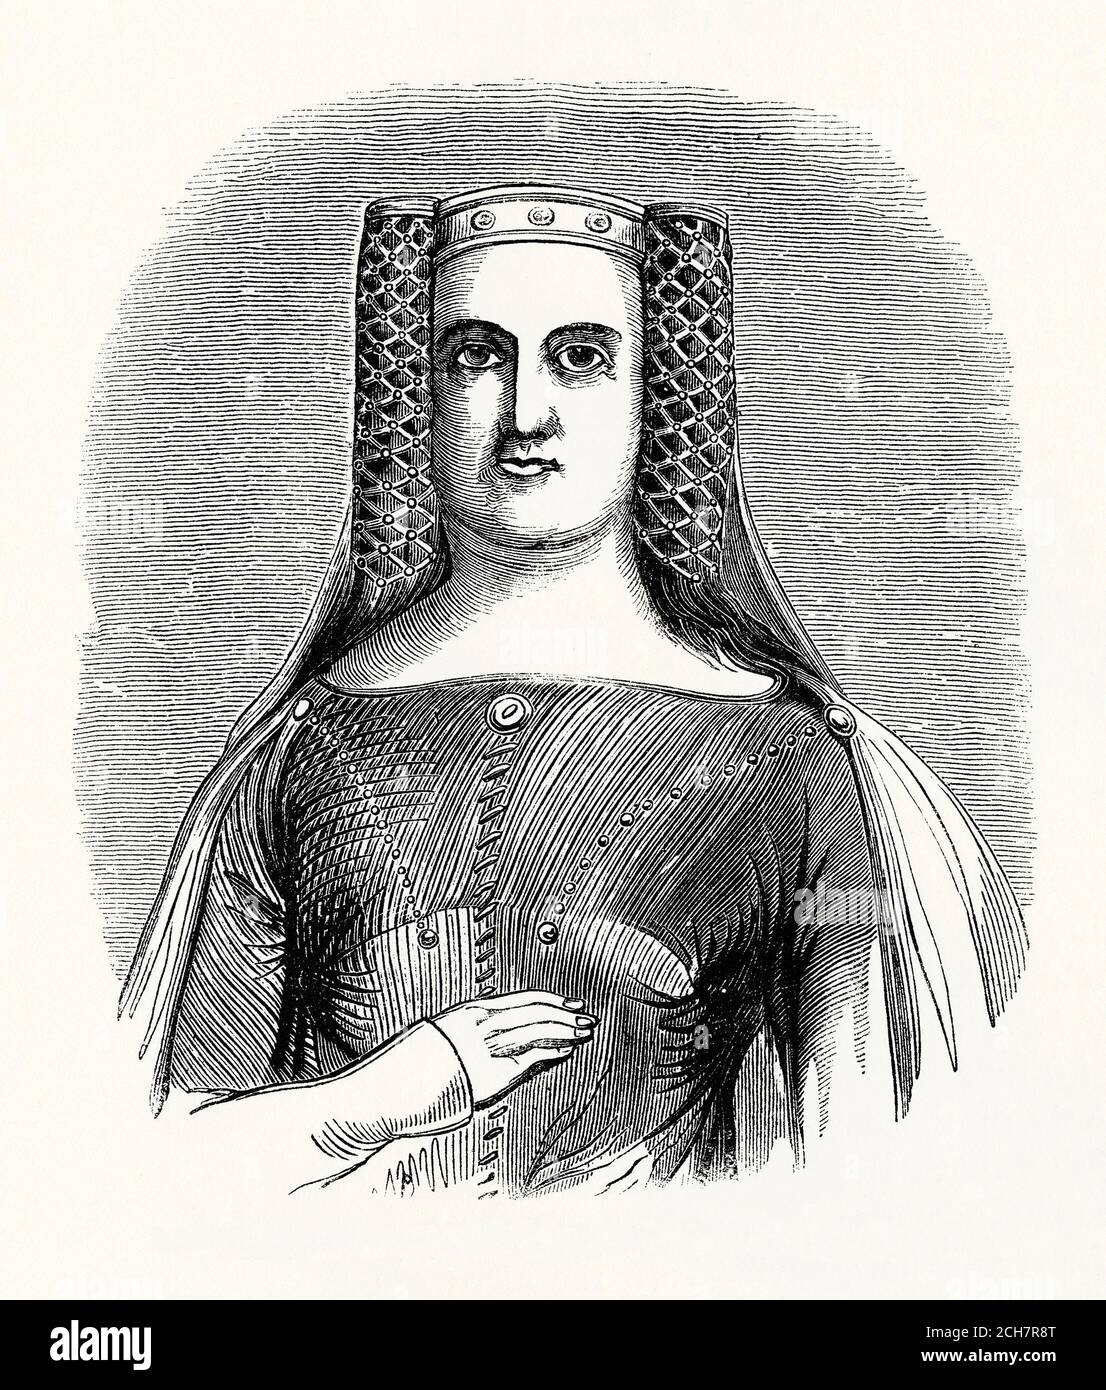 An old engraving of Philippa of Hainault (1310–1369). Philippa was Queen of England, the wife of King Edward III. They married in 1328, some months after Edward's accession to the throne of England. She acted as regent in 1346 when her husband was away for the Hundred Years' War. Phillipa influenced King Edward to take interest in the nation's commercial expansion and often went on expeditions to Scotland and France. She was popular with the English people, which helped maintain peace in England throughout their reign. Stock Photo